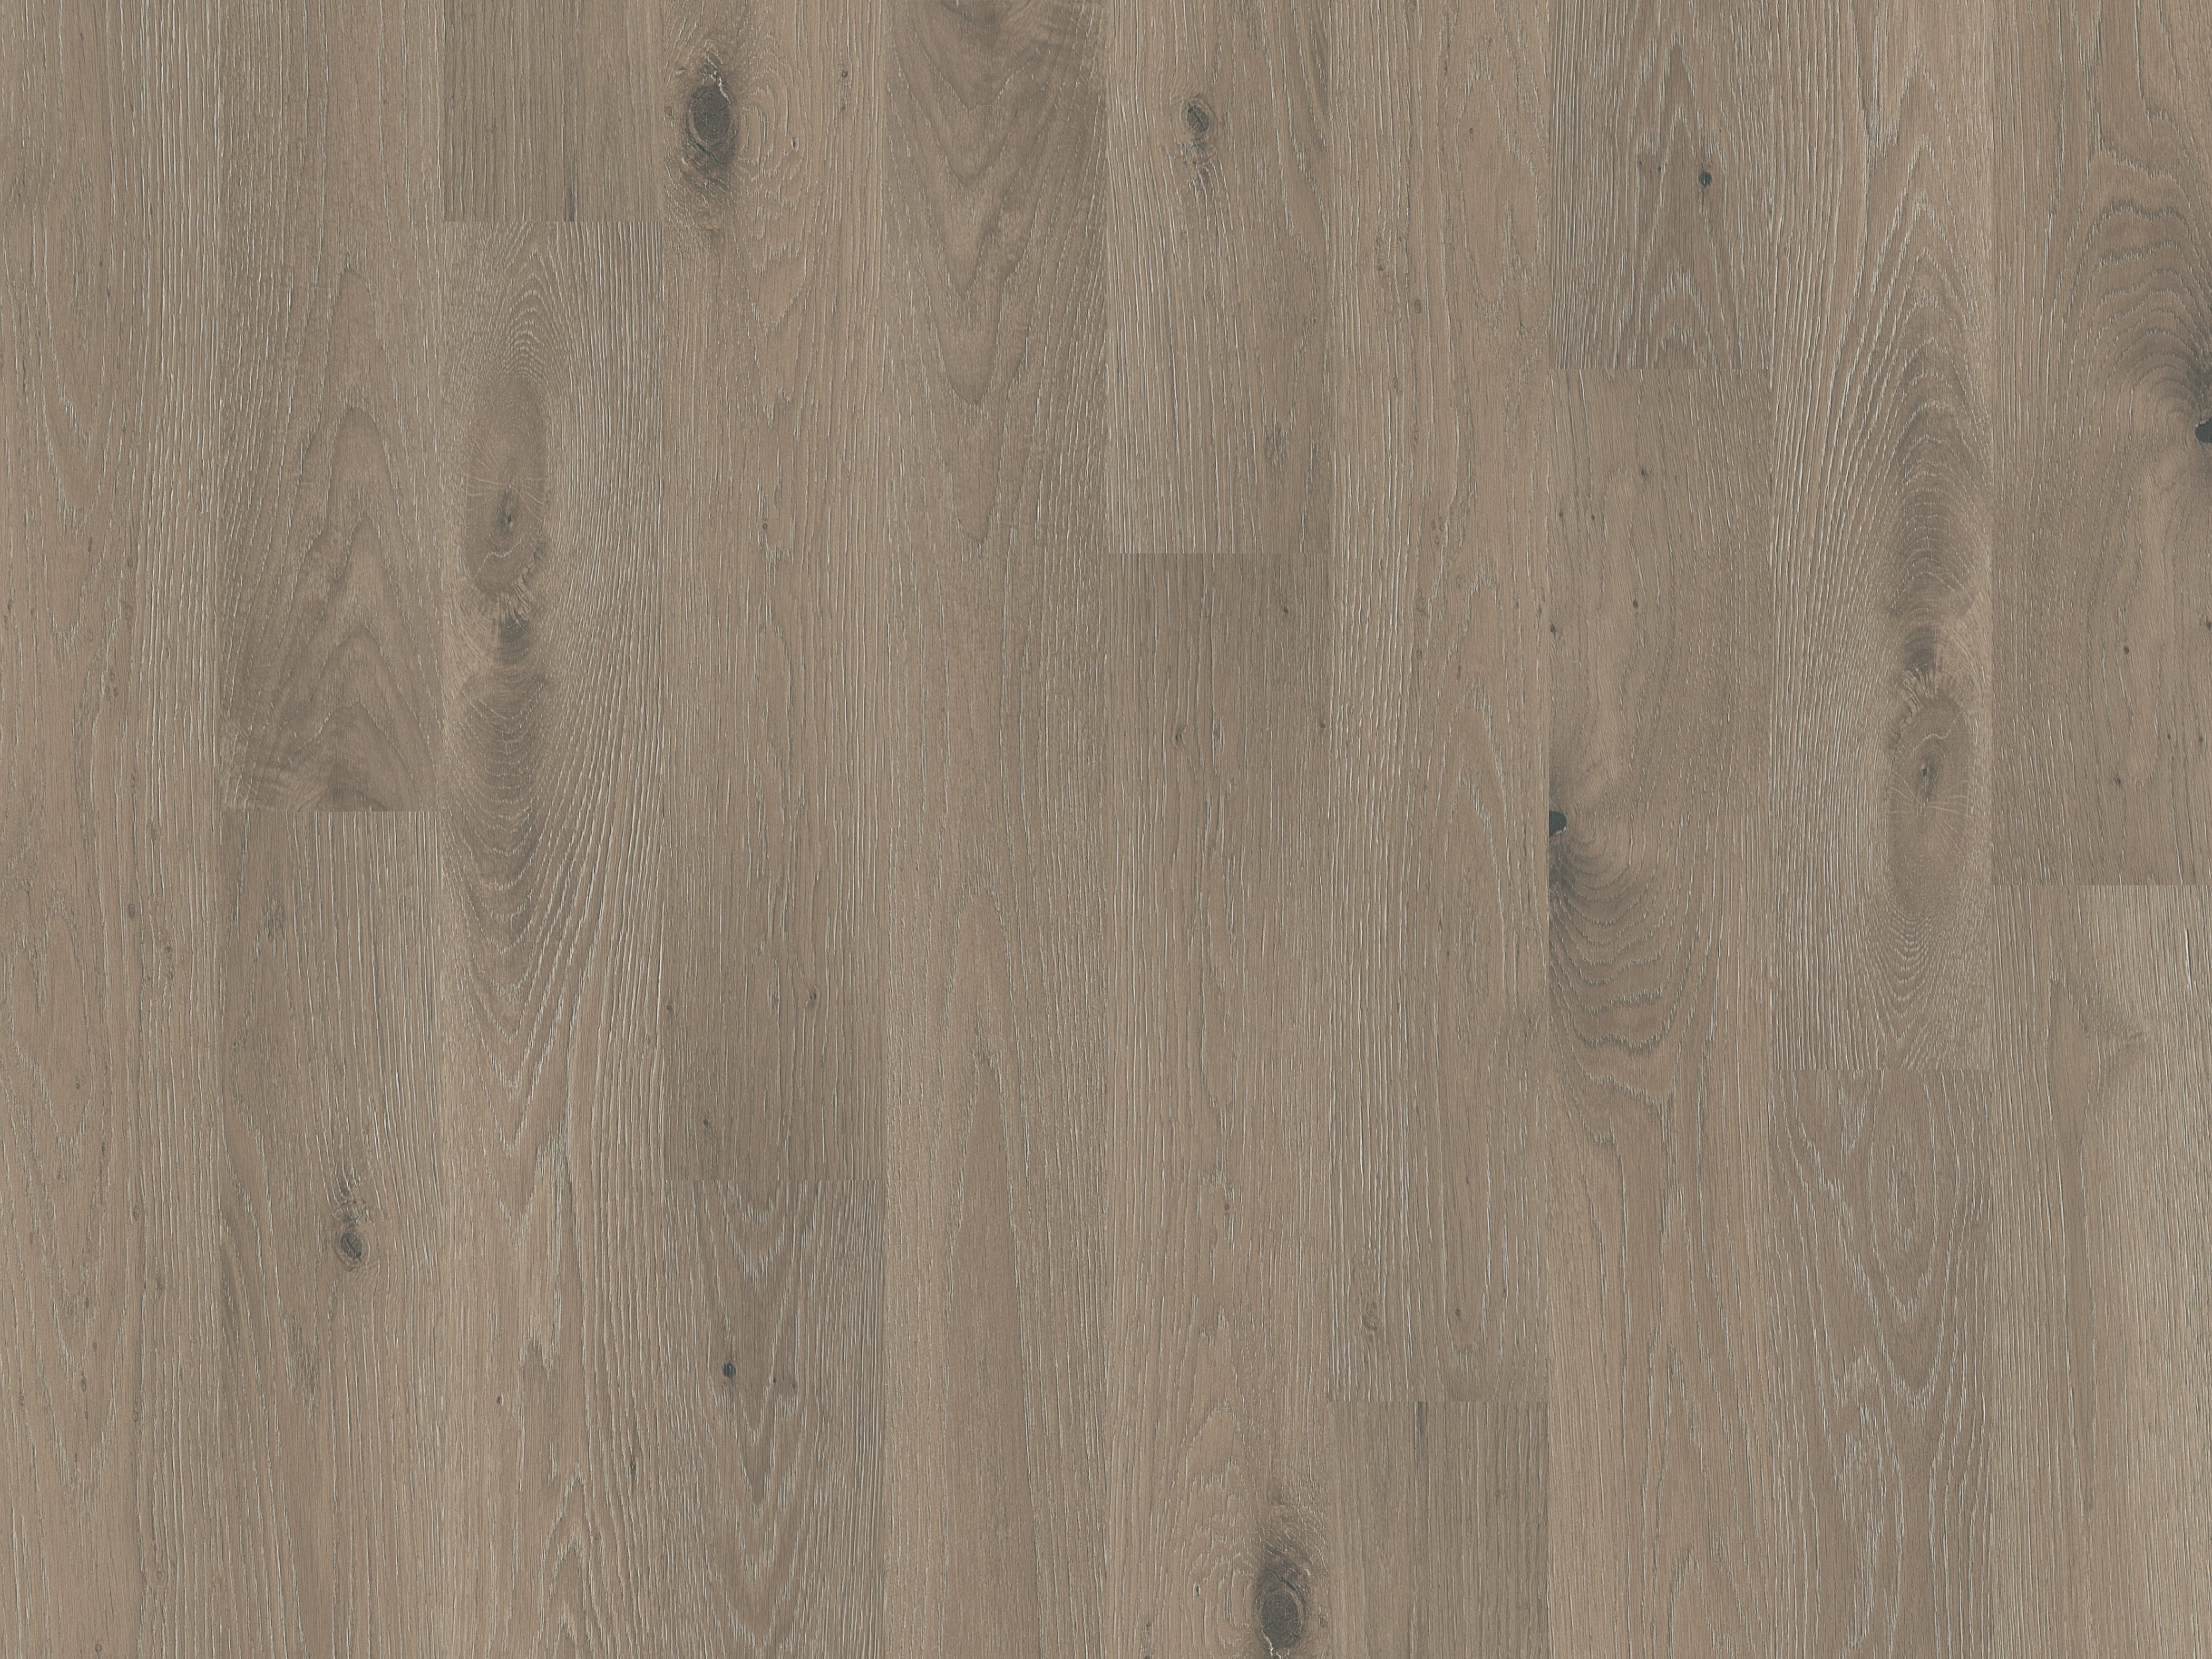 duchateau the guild lineage olivia european oak engineered hardnatural wood floor uv lacquer finish for interior use distributed by surface group international